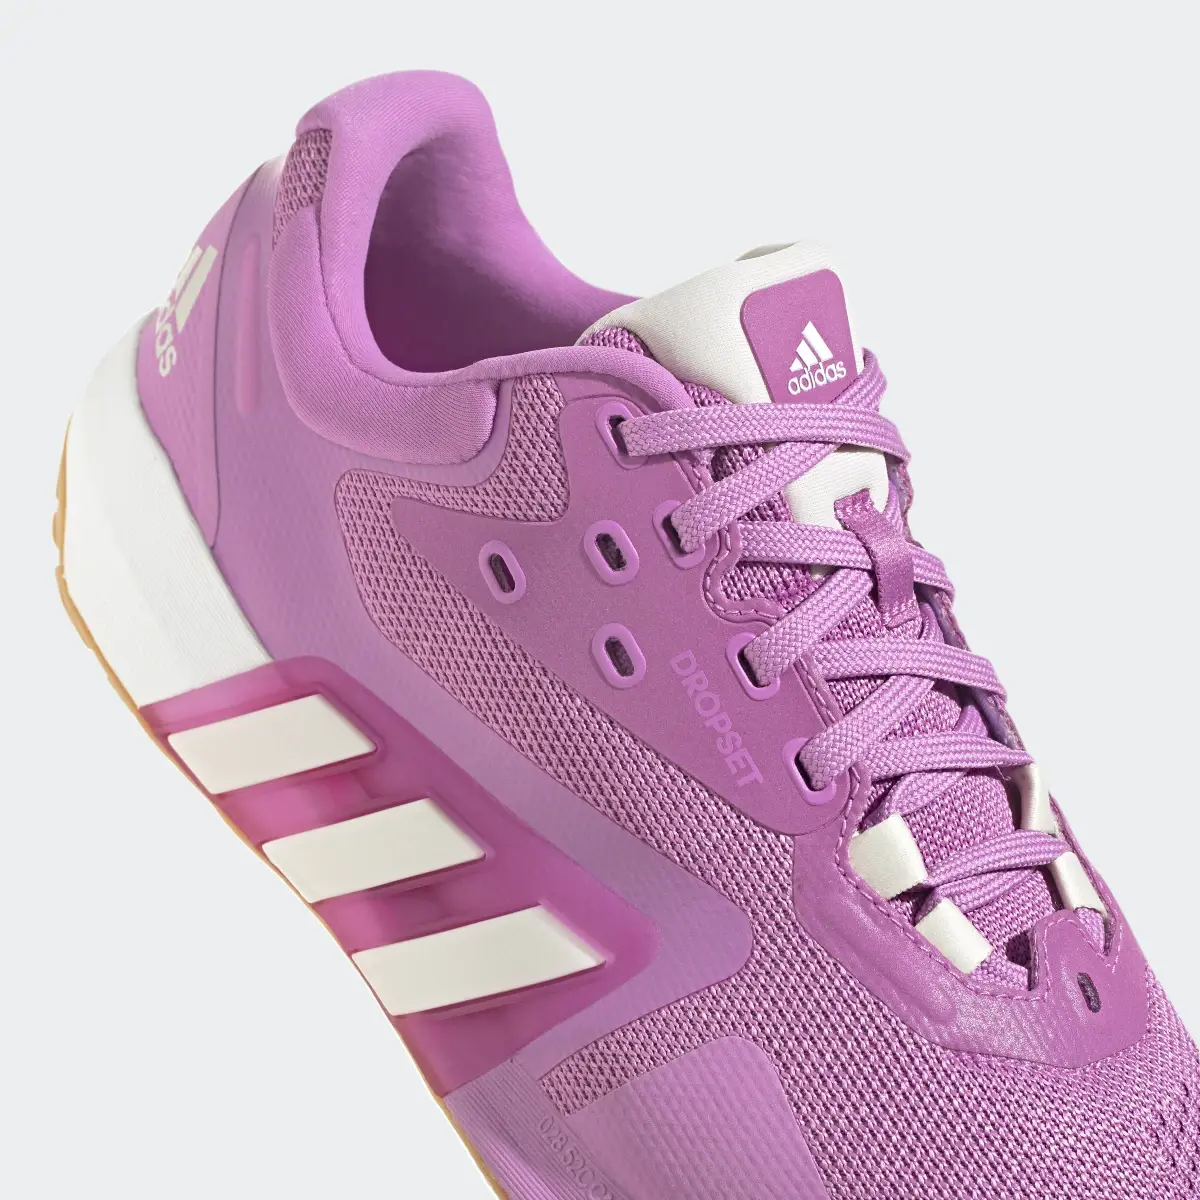 Adidas Dropset Trainer Shoes. 3